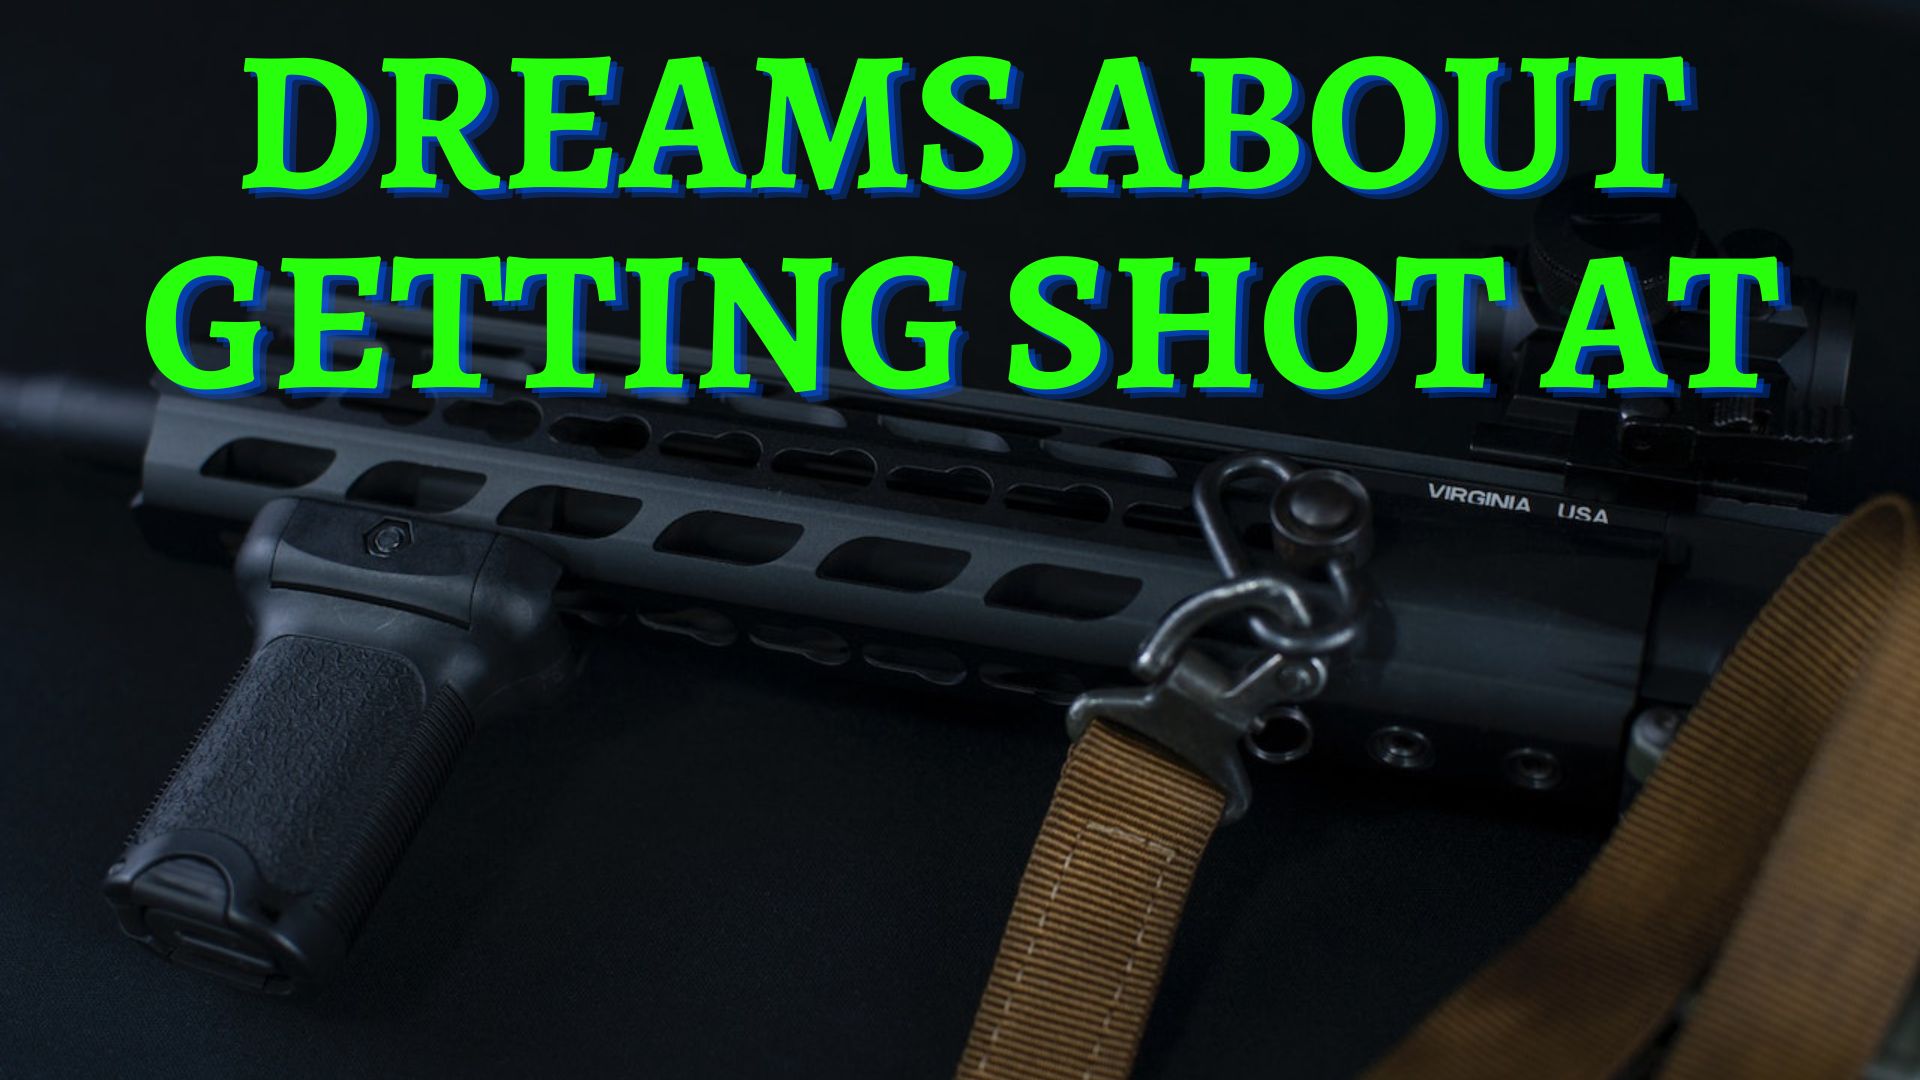 Dreams About Getting Shot At - Meaning And Symbolism